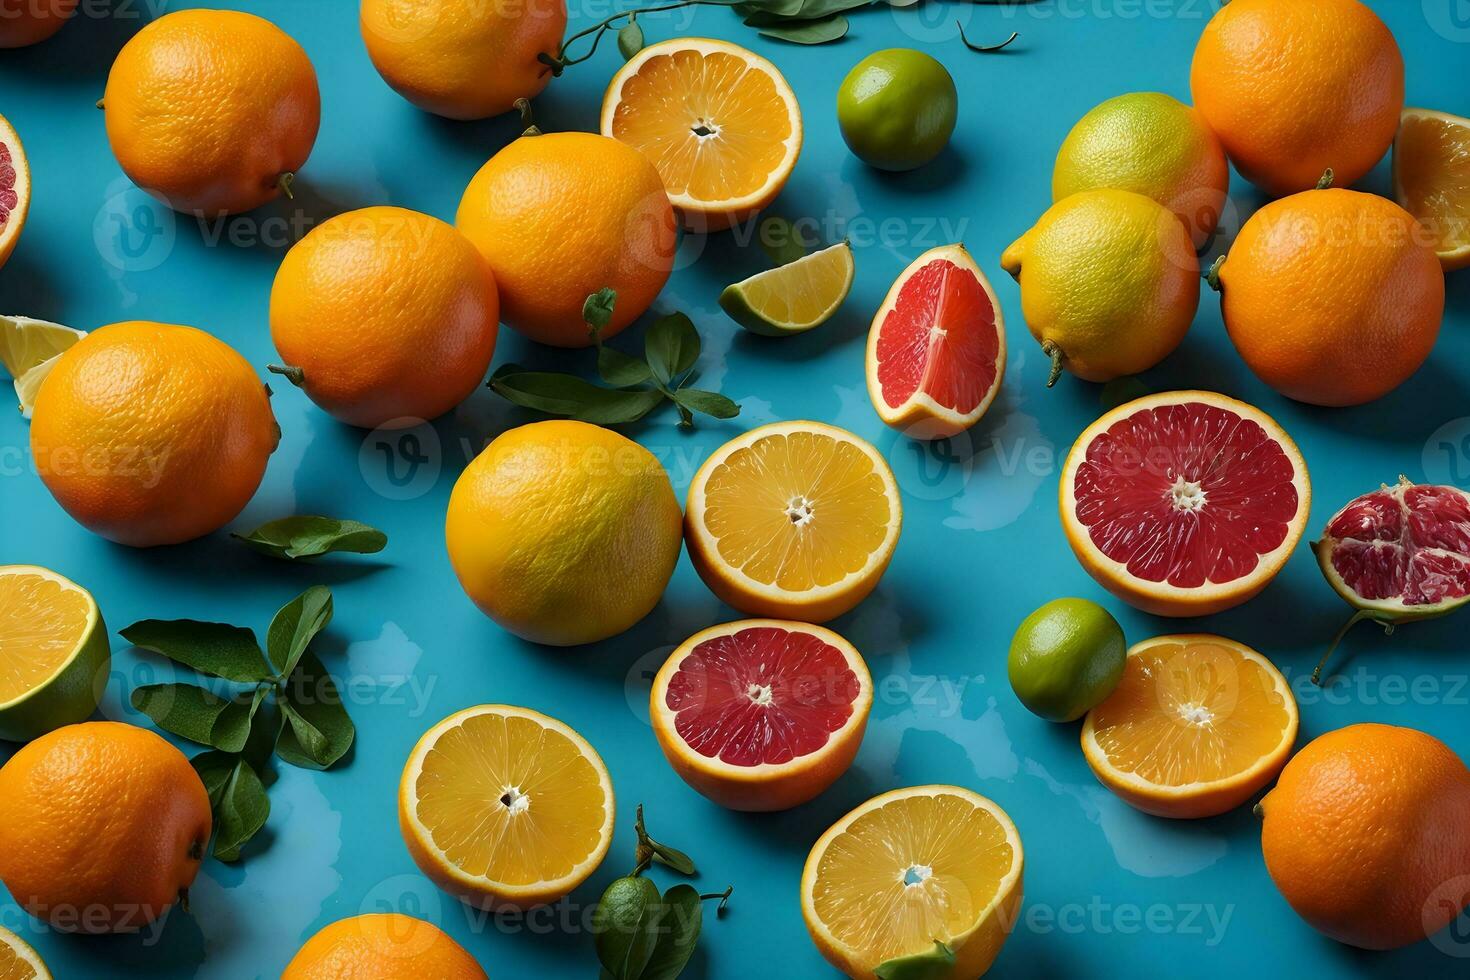 vibrant collection of citrus fruits arranged in an artful composition on a turquoise background. photo